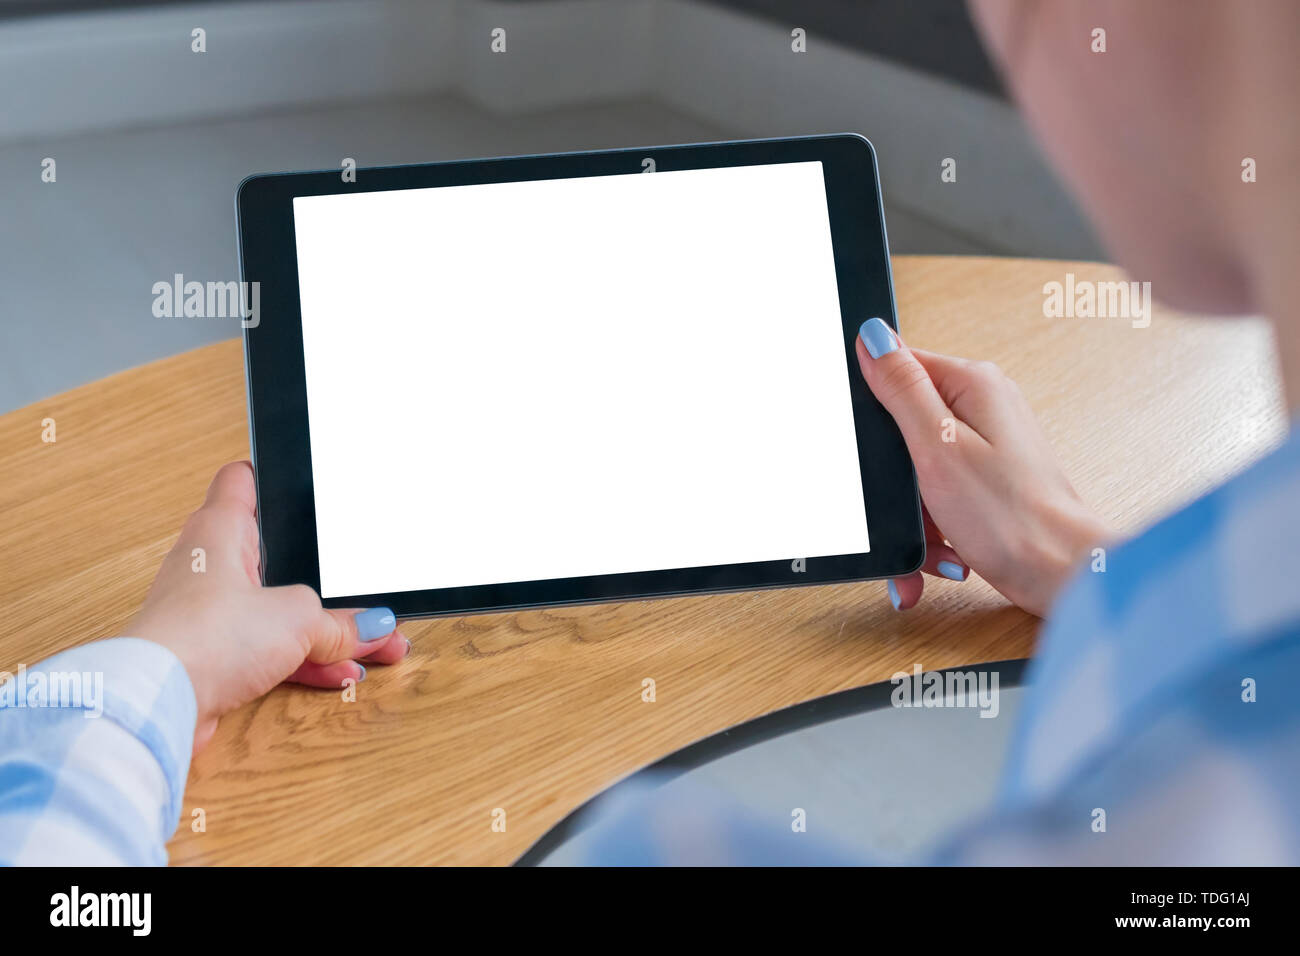 Mockup image: over shoulder close up view of woman looking at modern digital tablet computer device with white blank screen. Mock up, copyspace, leisu Stock Photo